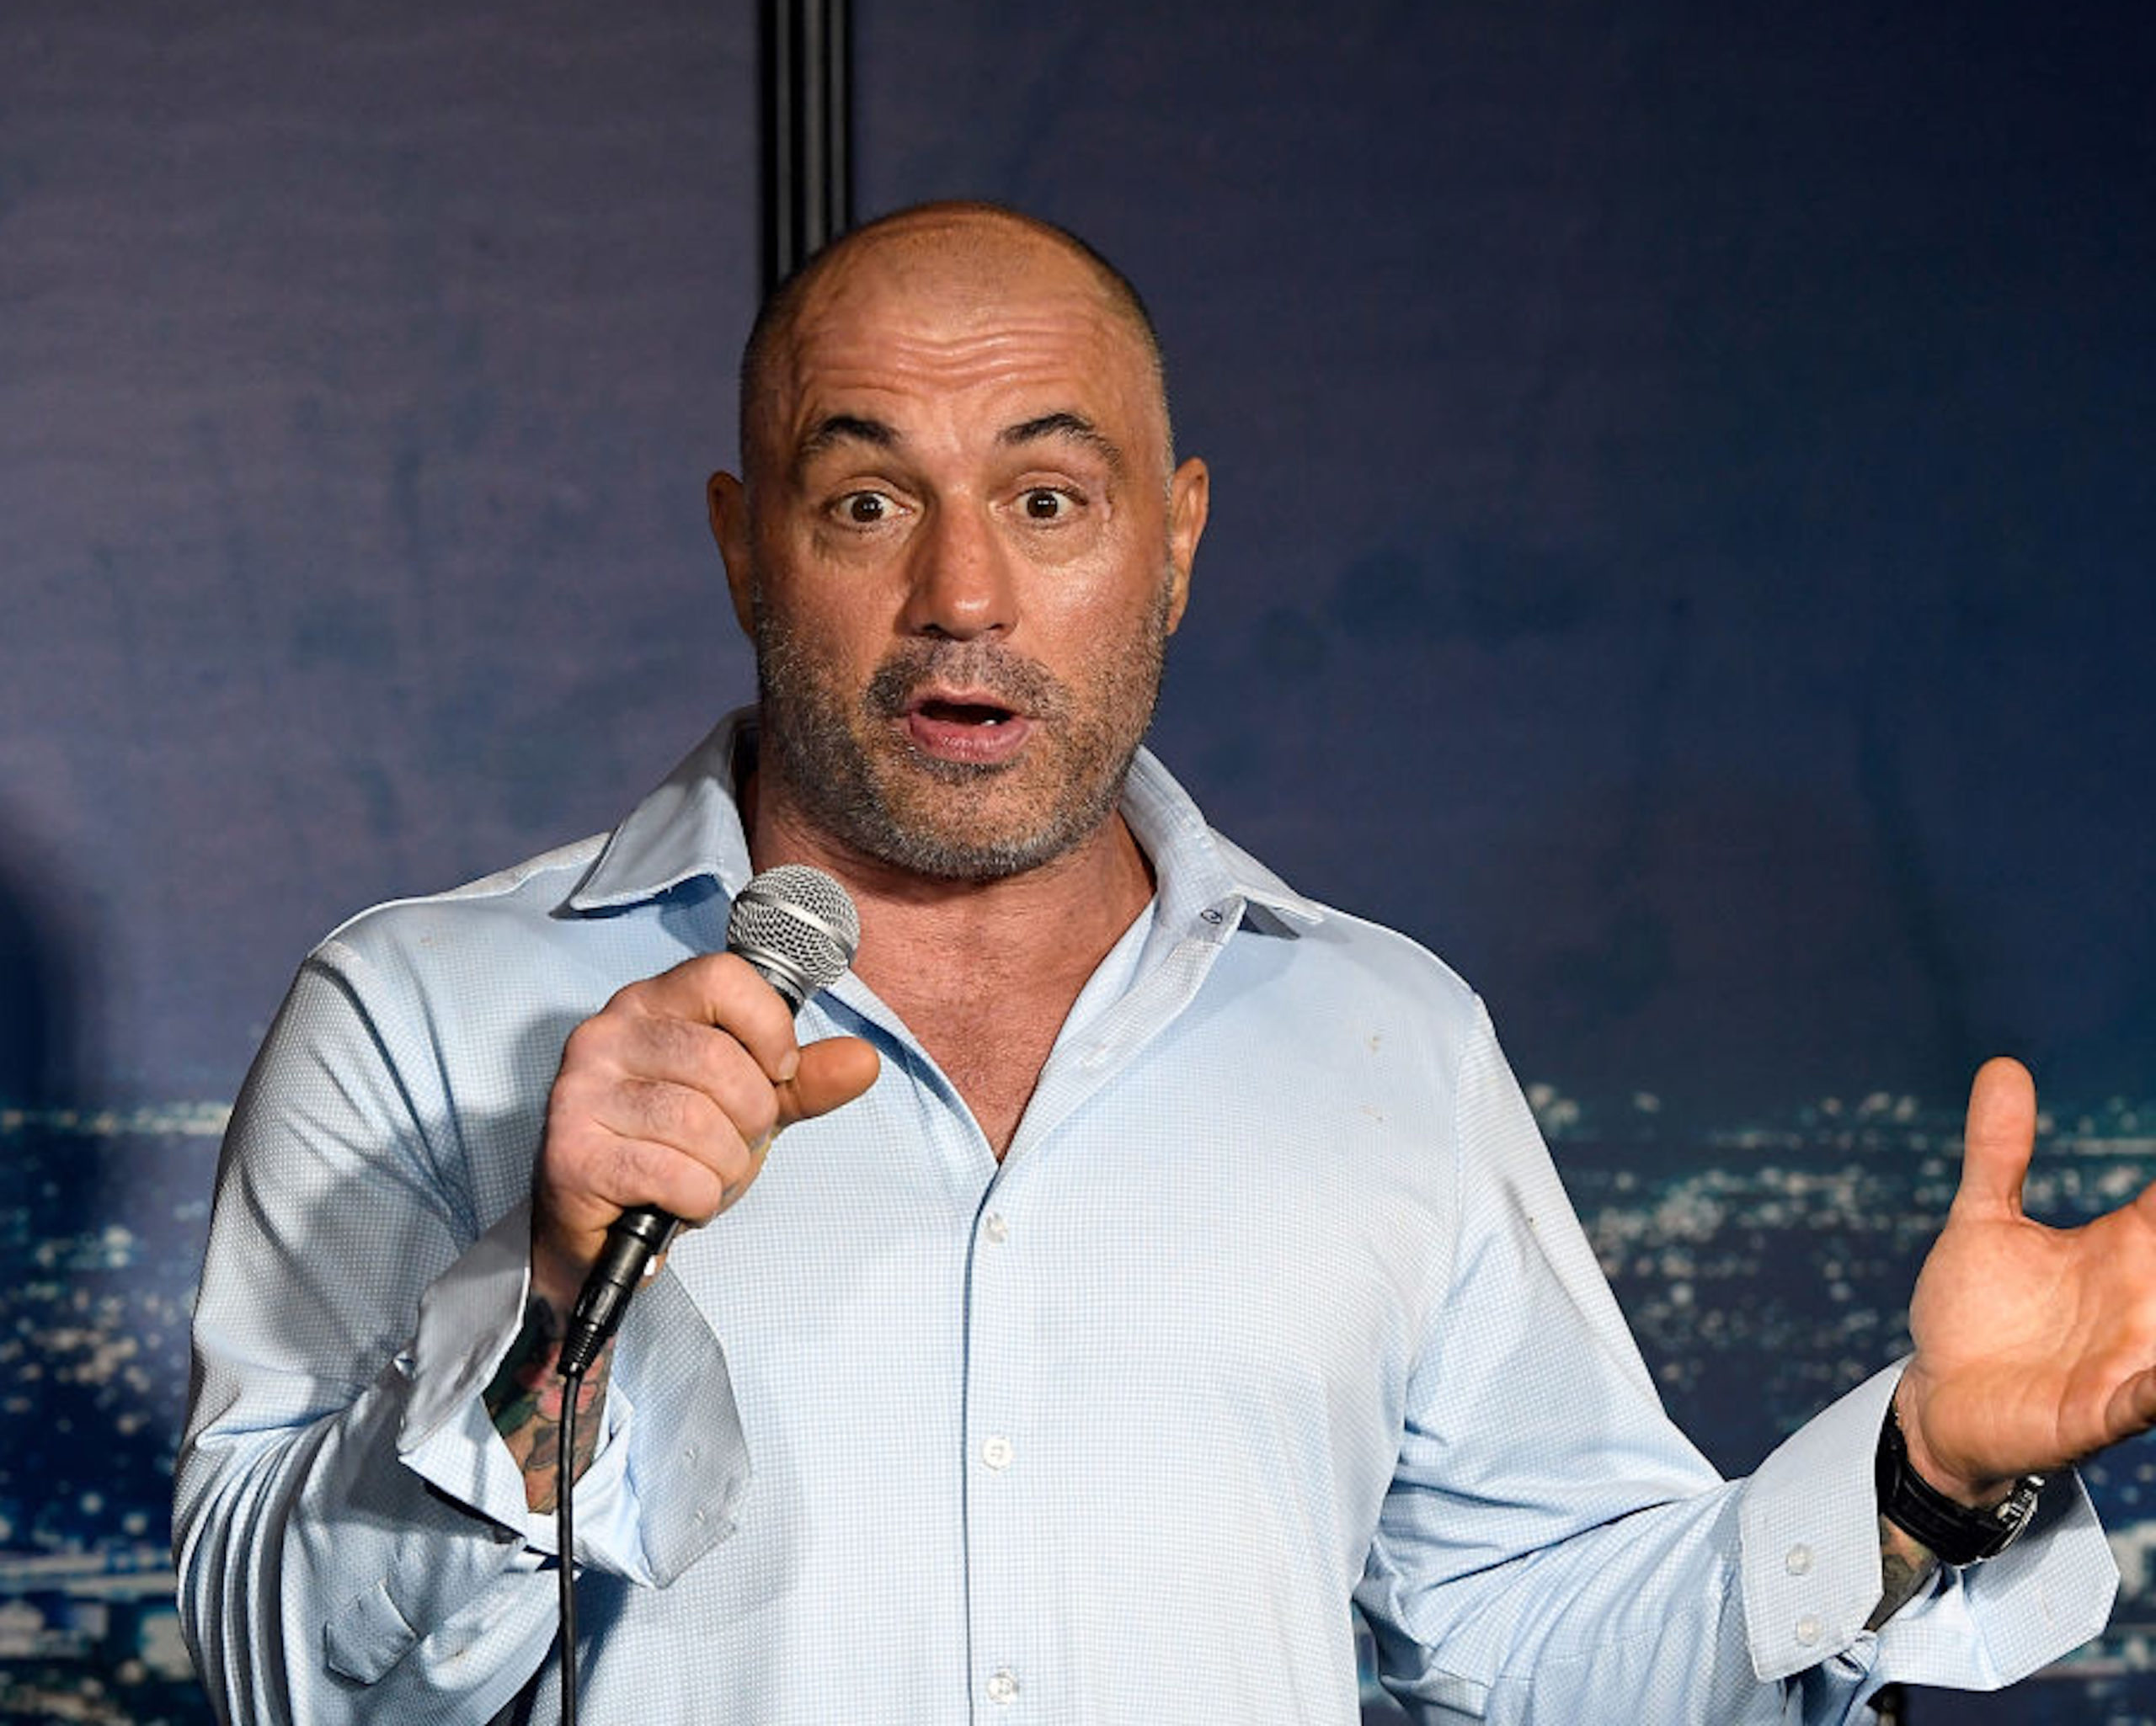 Joe Rogan Signs Exclusive Deal With Spotify, Moving Show Off YouTube